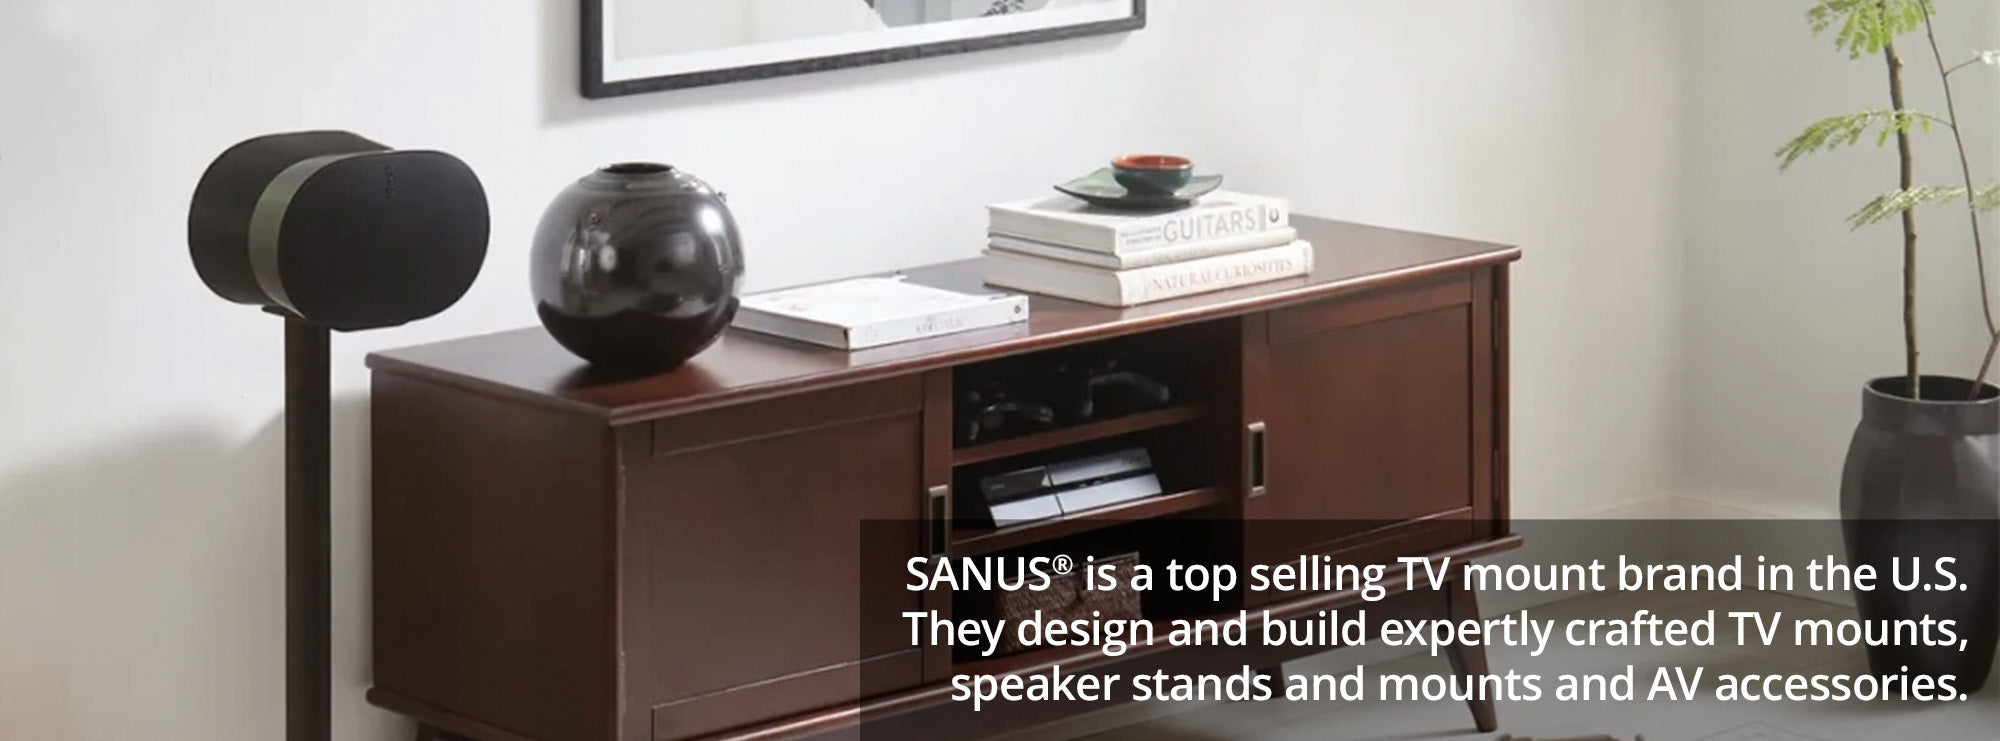 SANUS® is a top selling TV mount brand in the U.S. They design and build expertly crafted TV mounts, speaker stands and mounts and AV accessories.